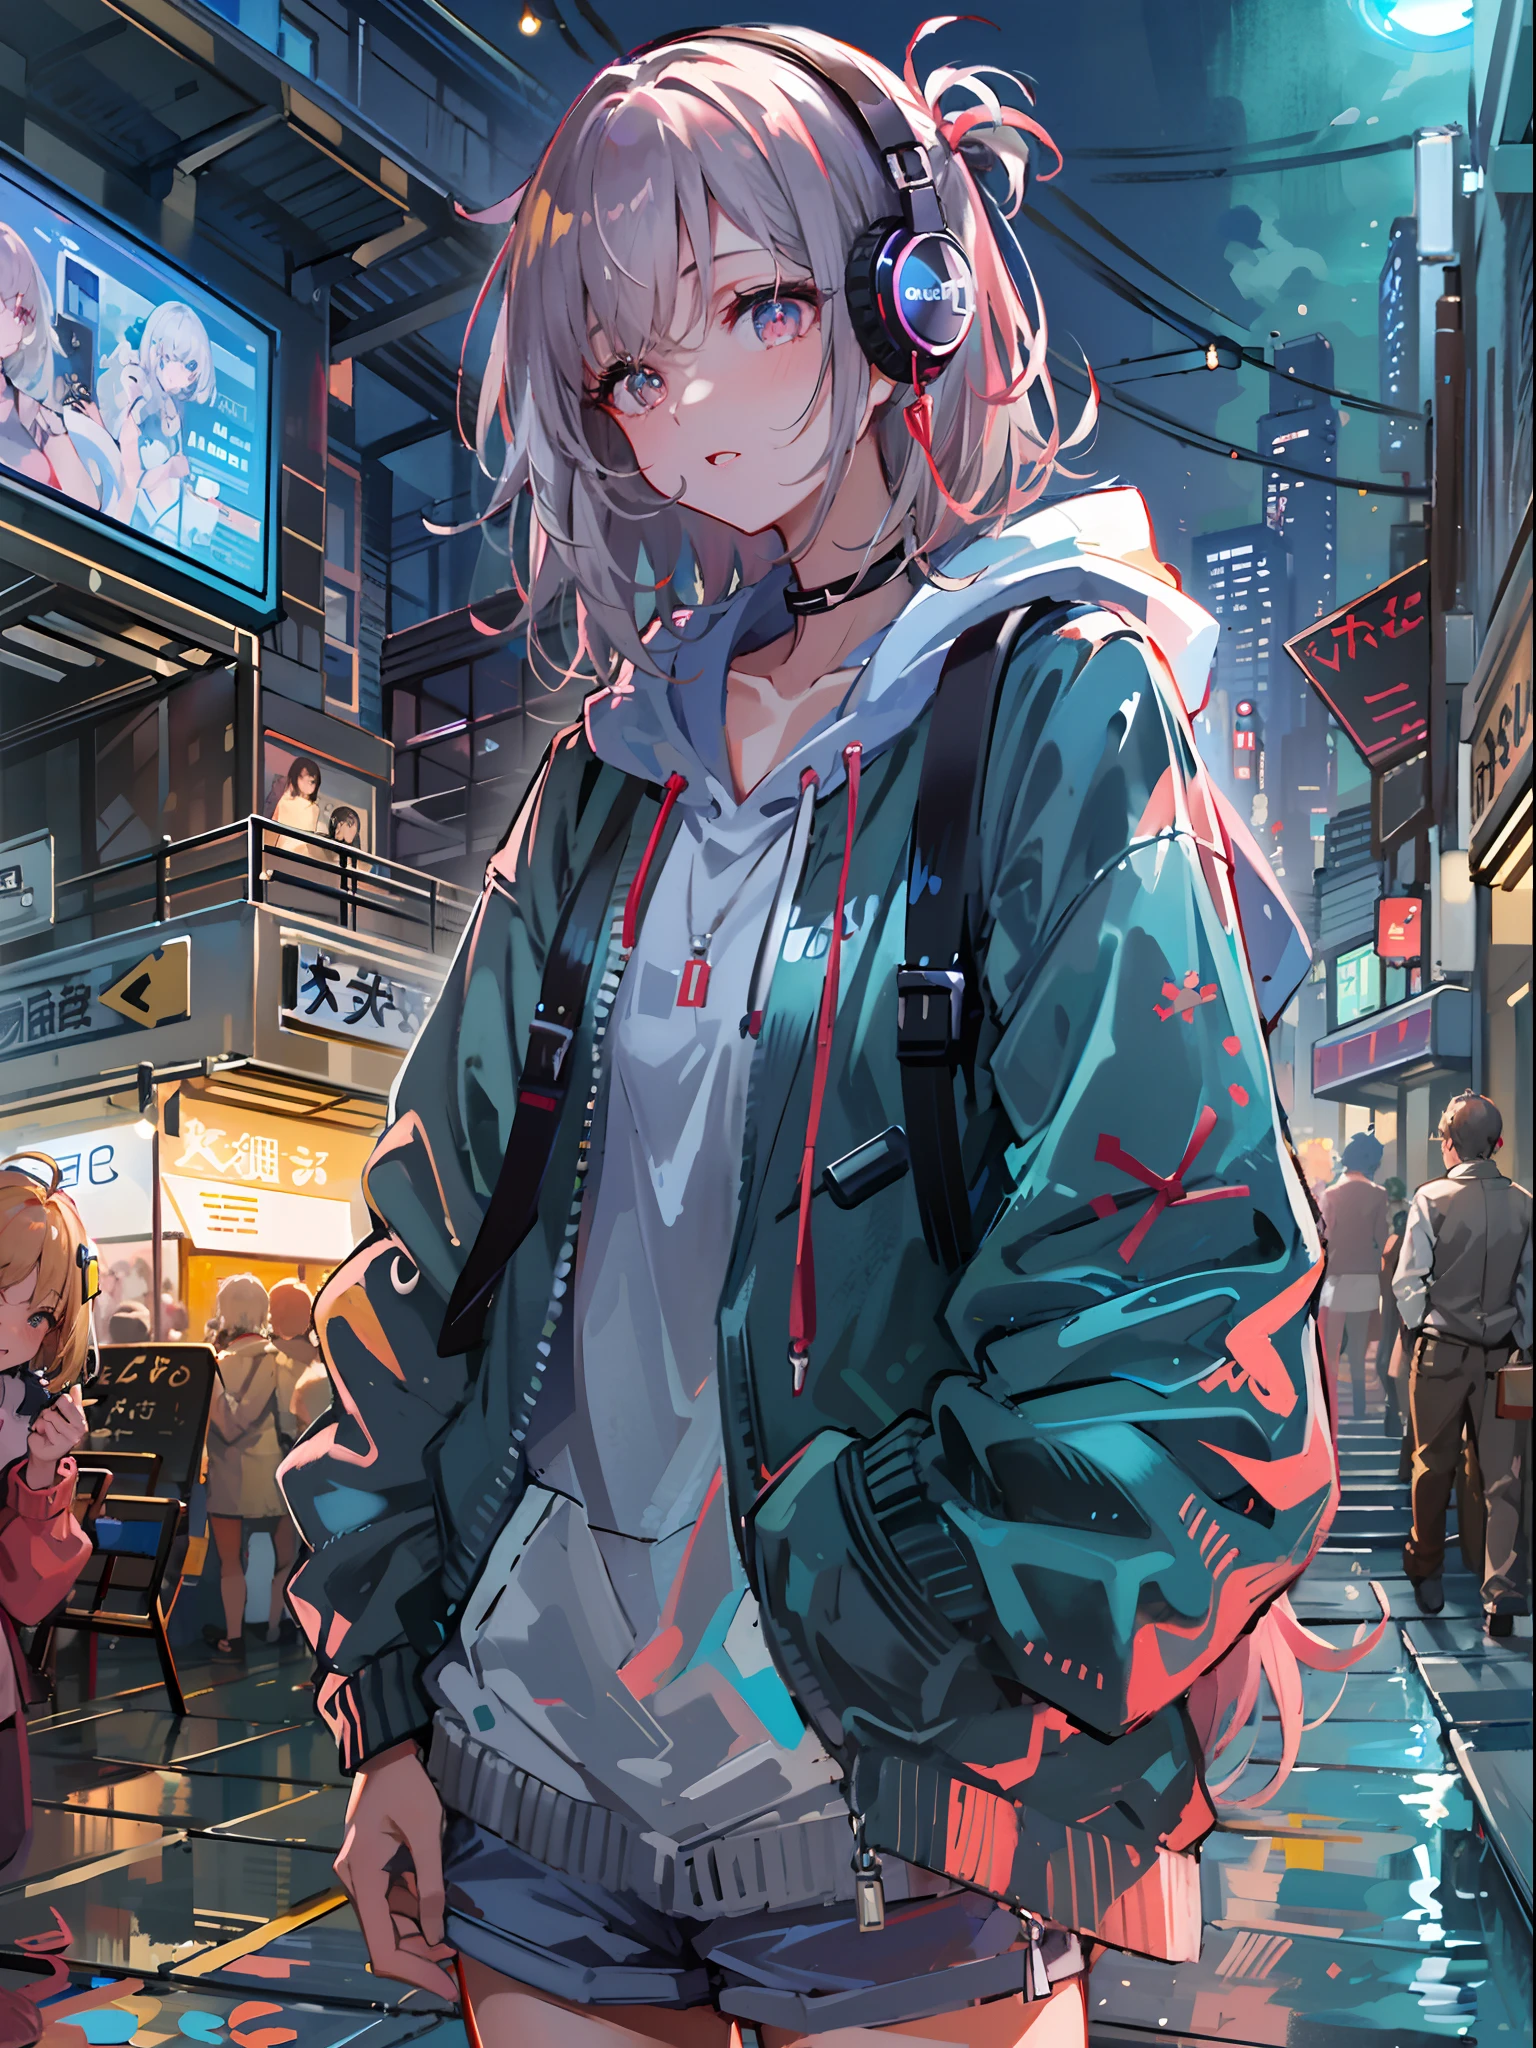 8K resolution、((top-quality))、((​masterpiece))、((Ultra-detail))、1 woman、solo、incredibly absurdness、Oversized hoodies、headphones、Street、plein air、Sateen、neons、Shortcut Hair、Brightly colored eyes、Hands in pockets、shortpants、water dripping